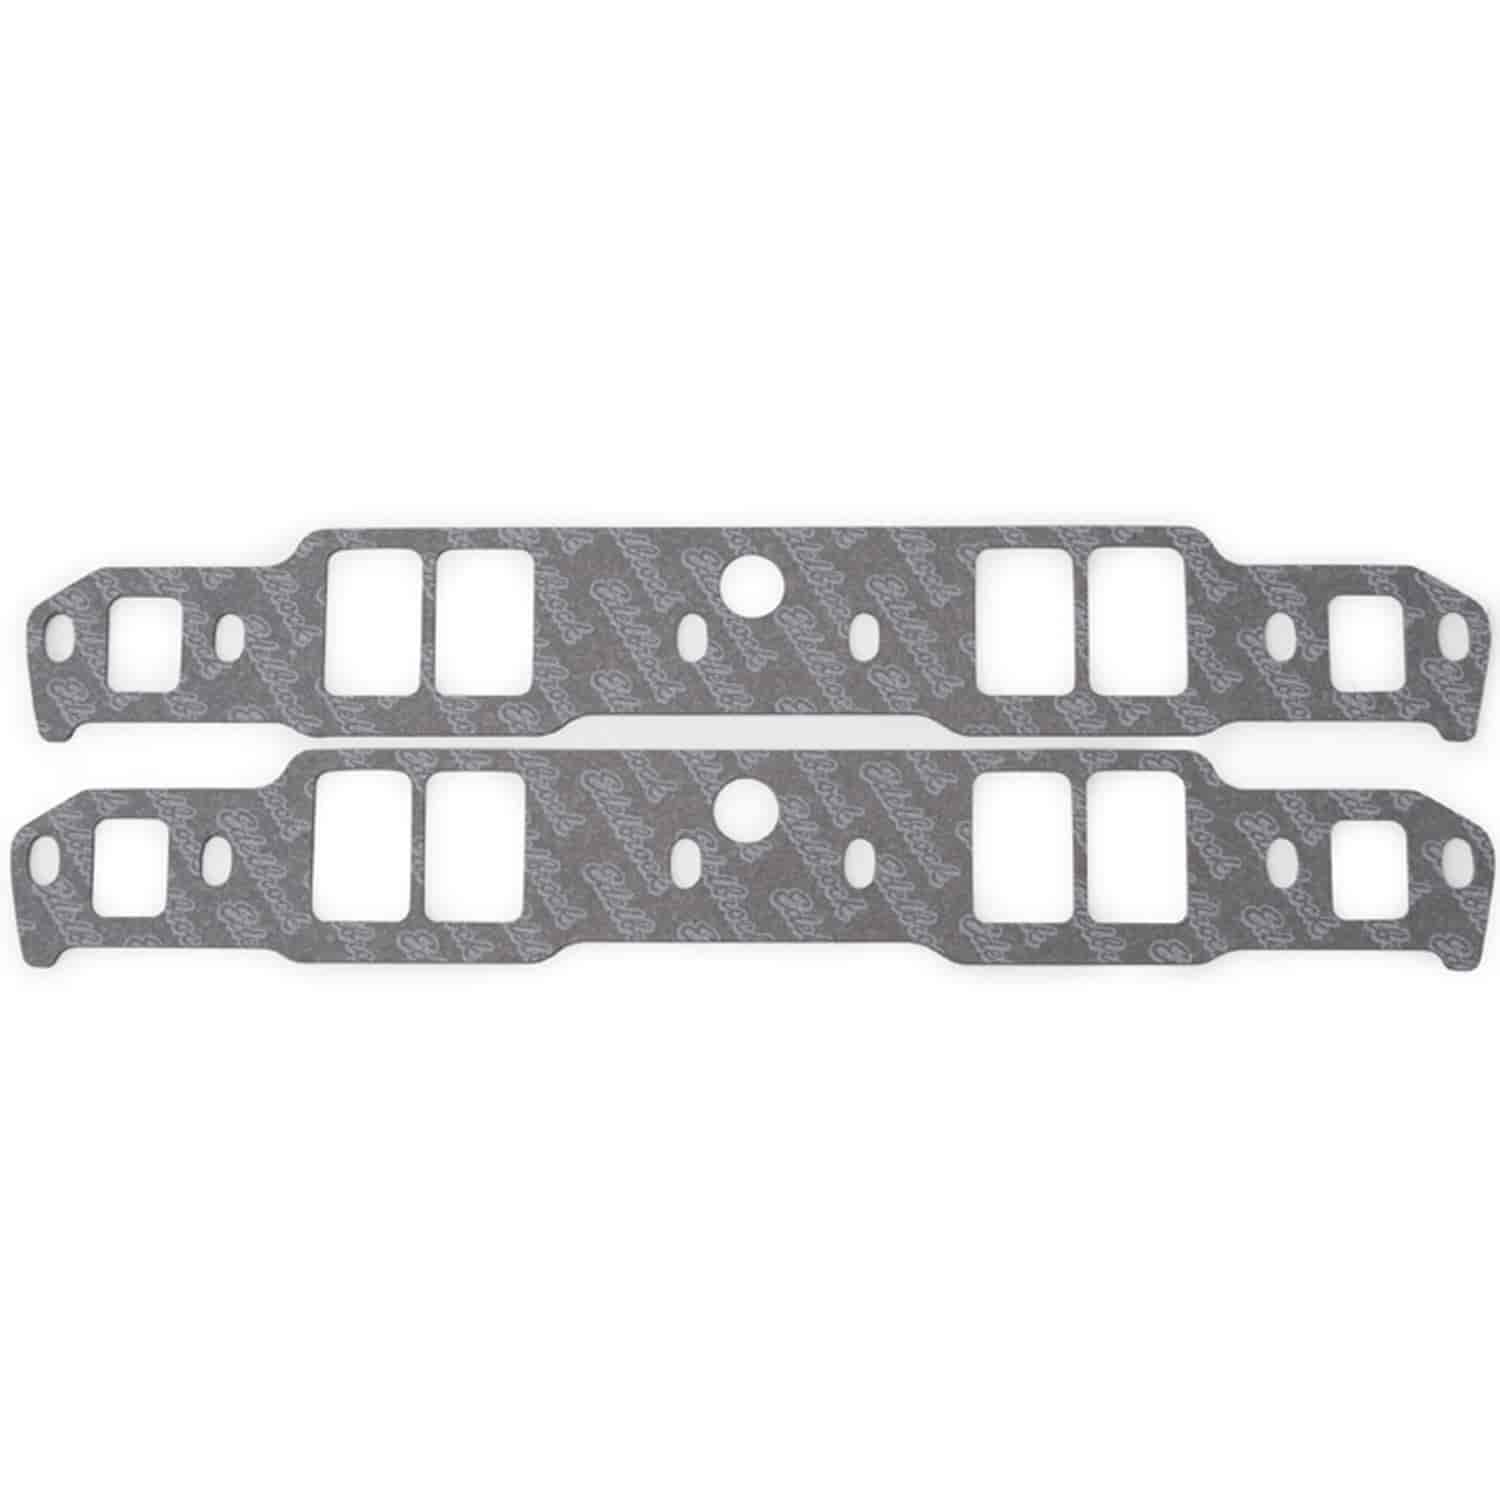 Intake Gaskets for Small Block Chevy with 23 Degree High Port Intakes